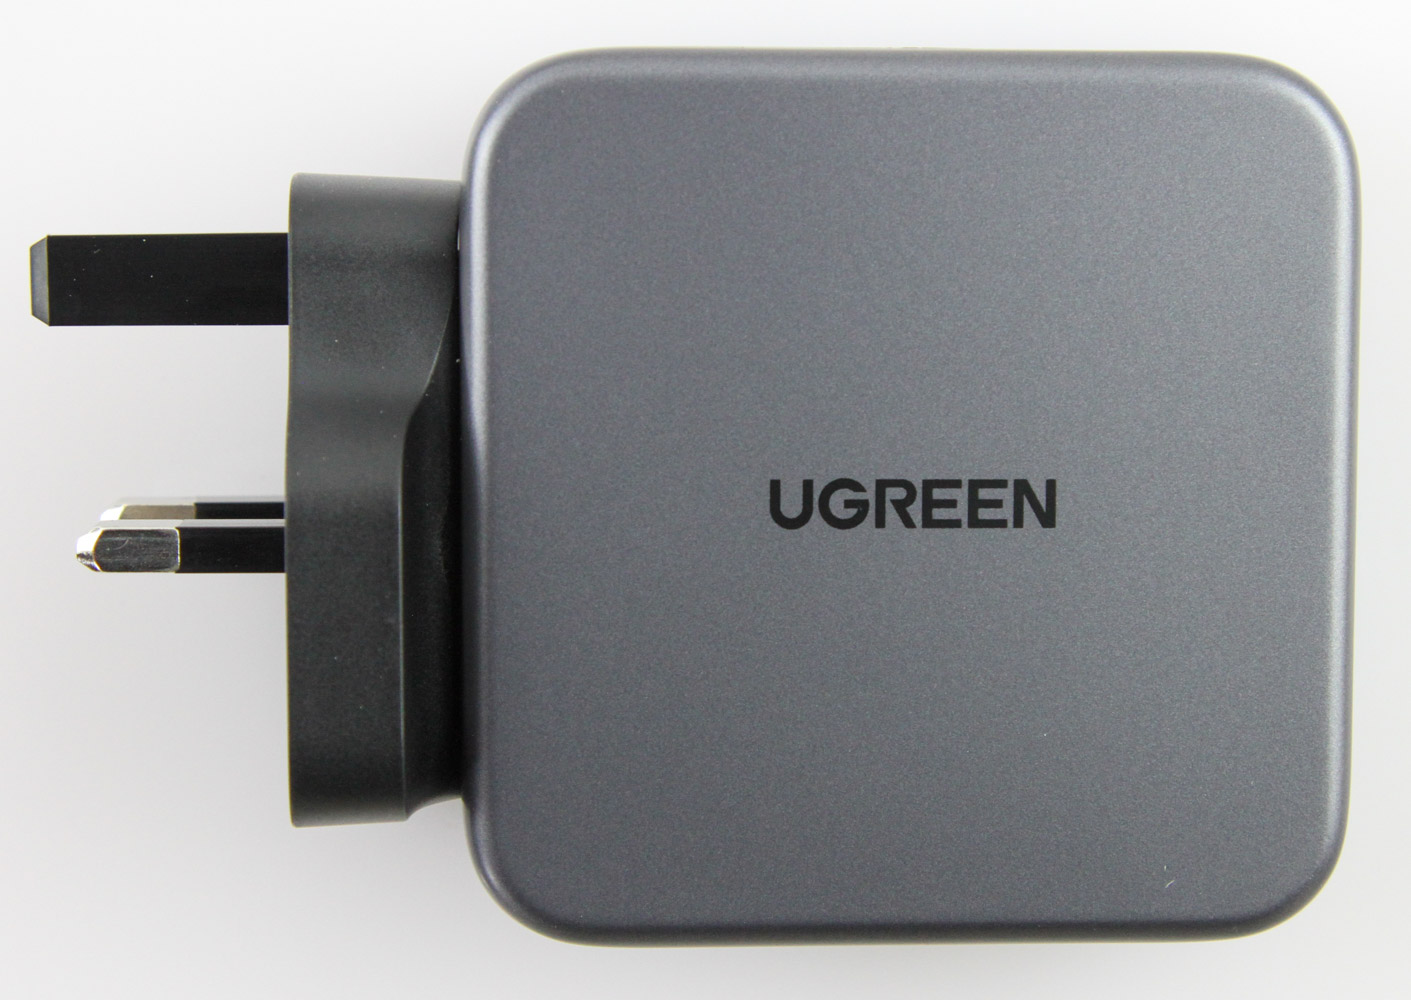 UGREEN 140W Nexode Power Delivery Charger Review 